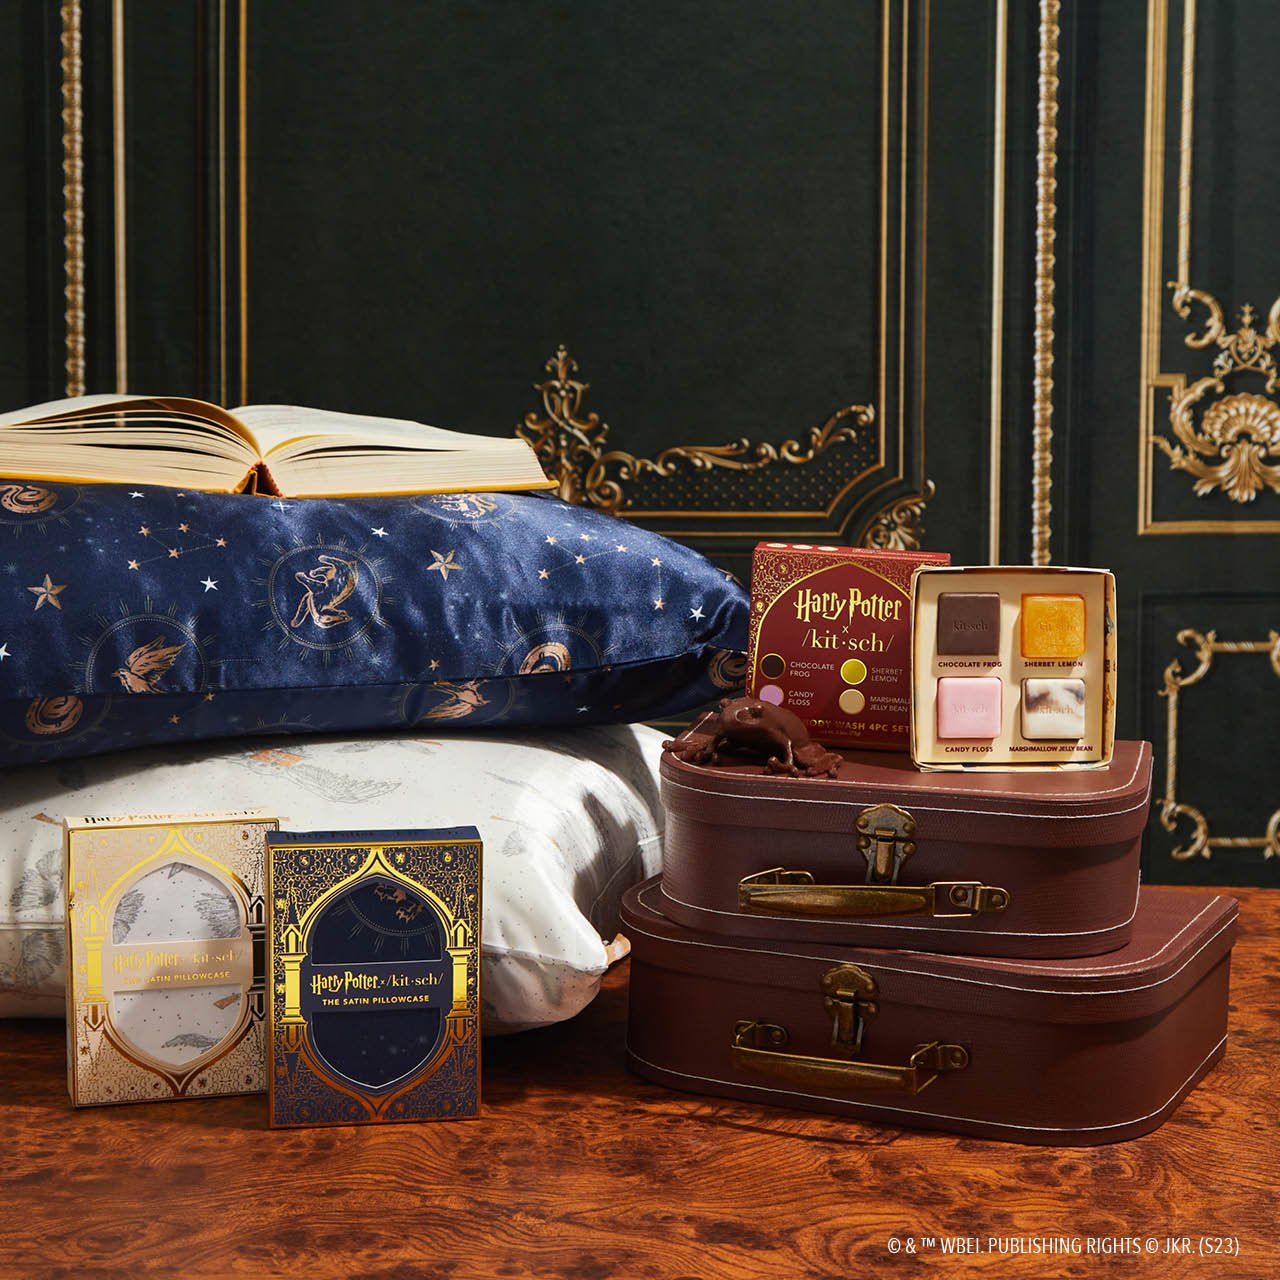 Ensemble collector Harry Potter x Kitsch King